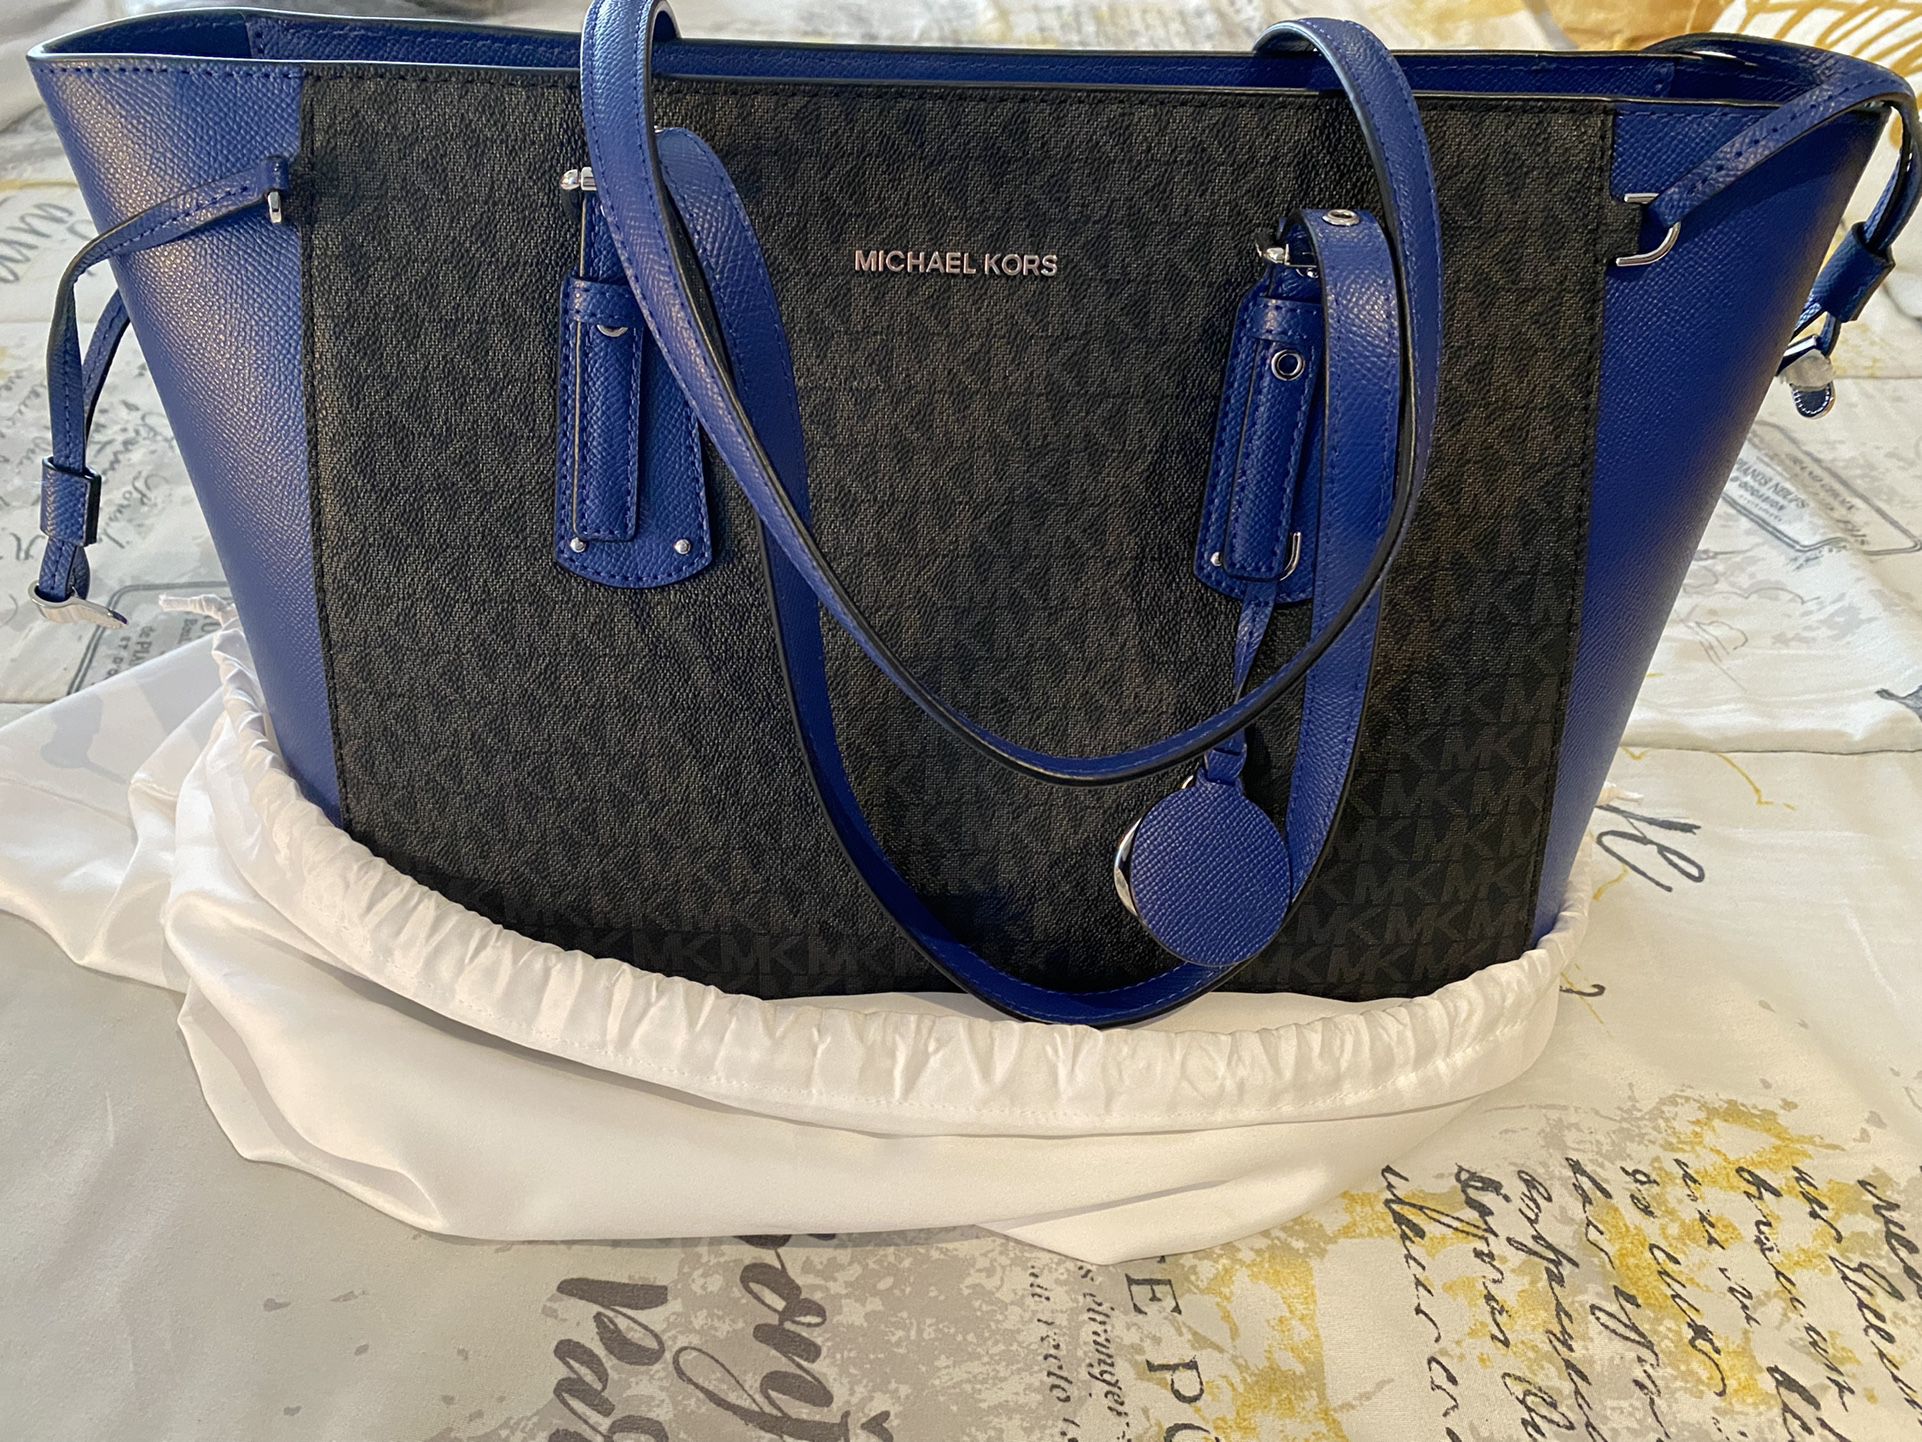 Michael kors voyager tote for Sale in Lancaster, CA - OfferUp